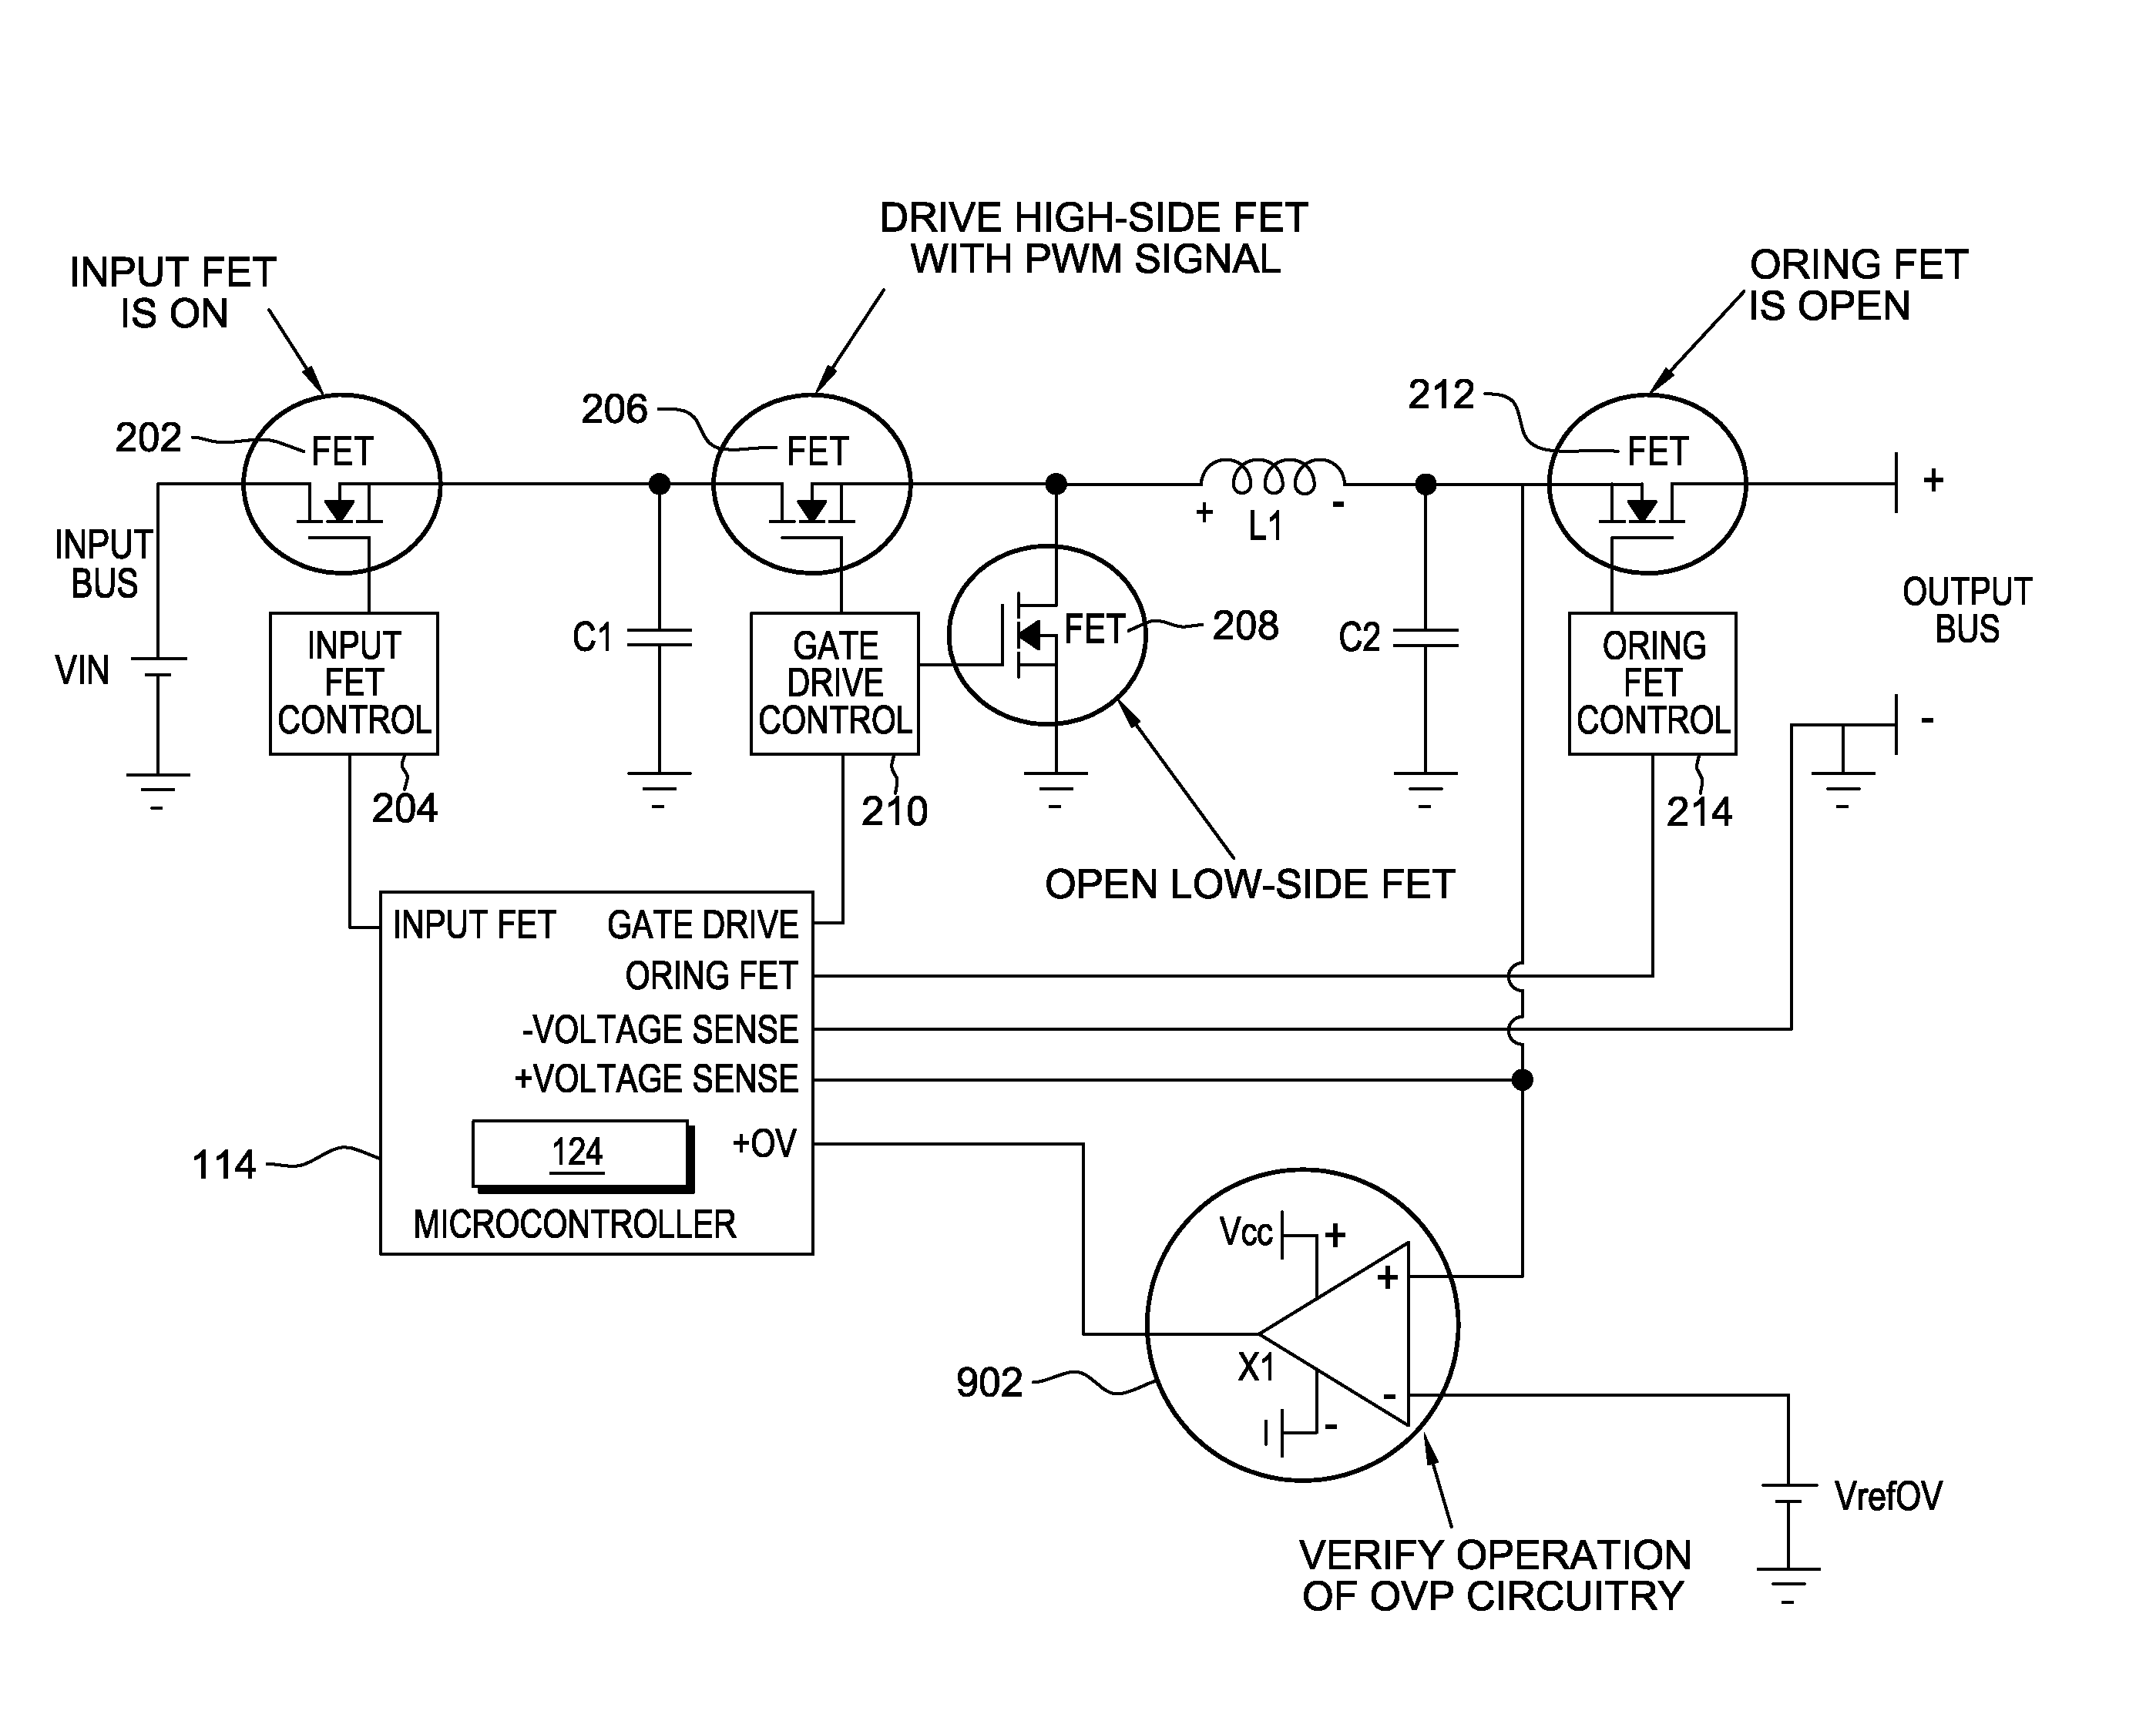 Testing protection schemes of a power converter